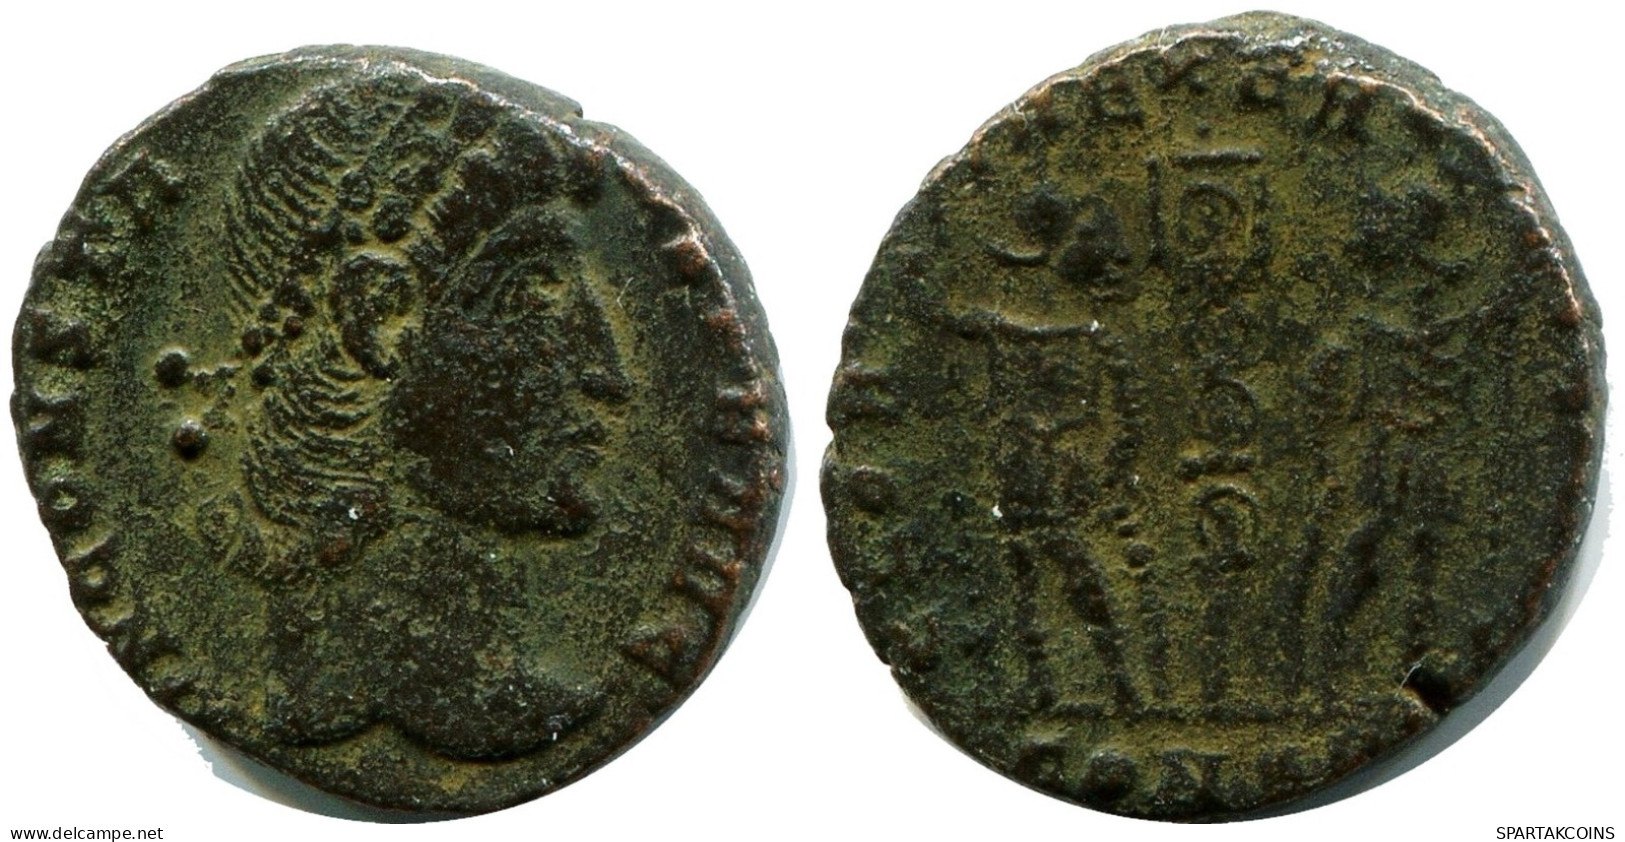 CONSTANS MINTED IN CONSTANTINOPLE FROM THE ROYAL ONTARIO MUSEUM #ANC11921.14.E.A - El Imperio Christiano (307 / 363)